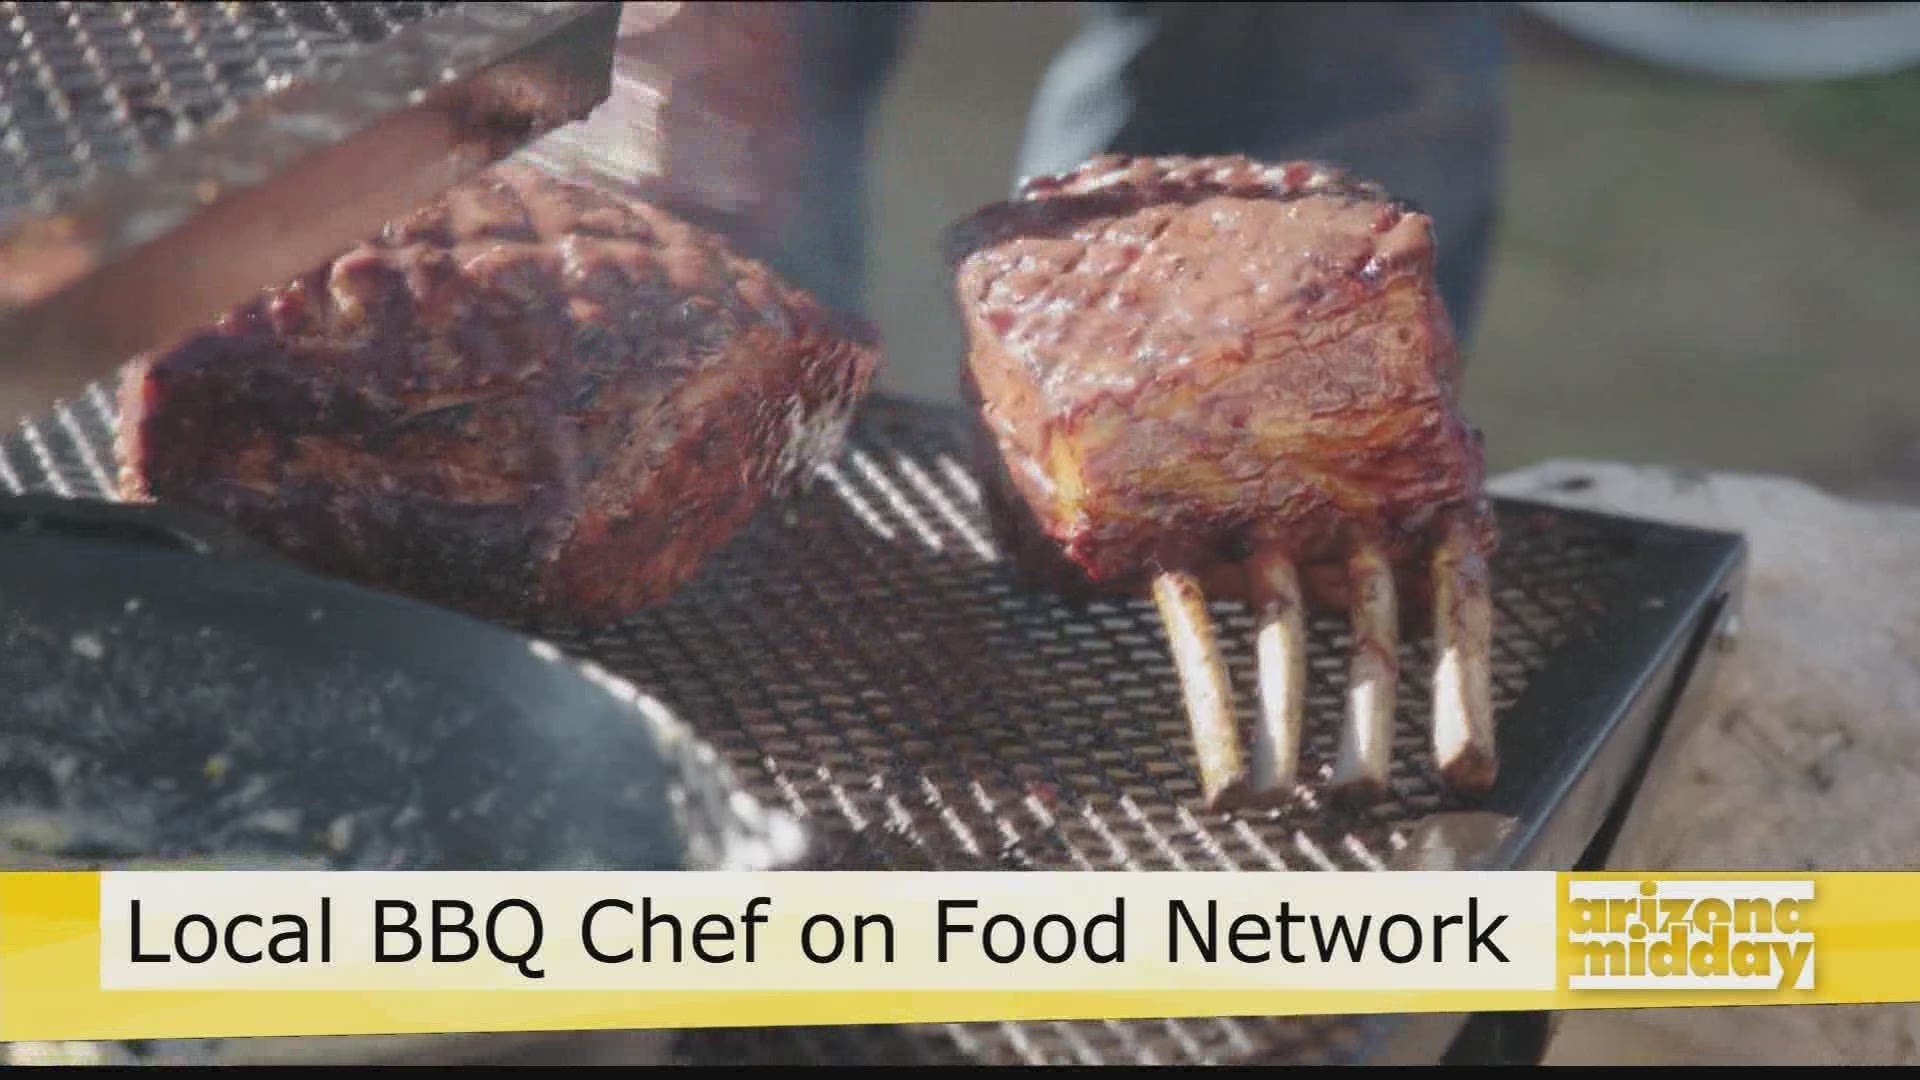 Terry Matthews, the BBQ Daddy, gives us the scoop on his time on Food Network's BBQ Brawl plus some tips for home chefs